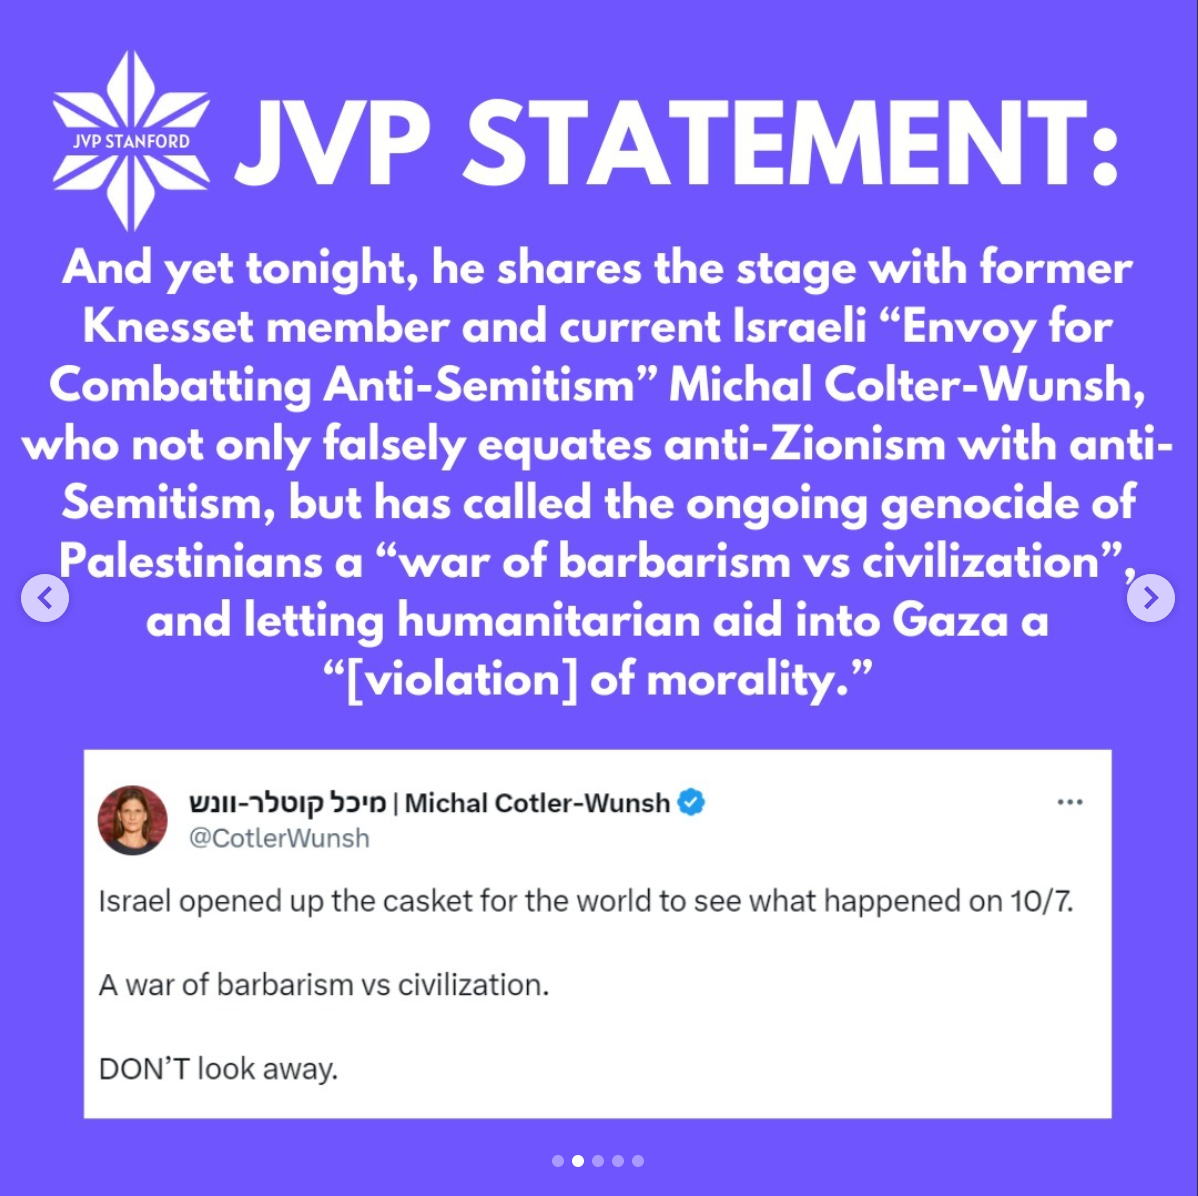 A screenshot that includes a JVP statement criticizing Saller's decision to share the stage with Colter-Wunsh.